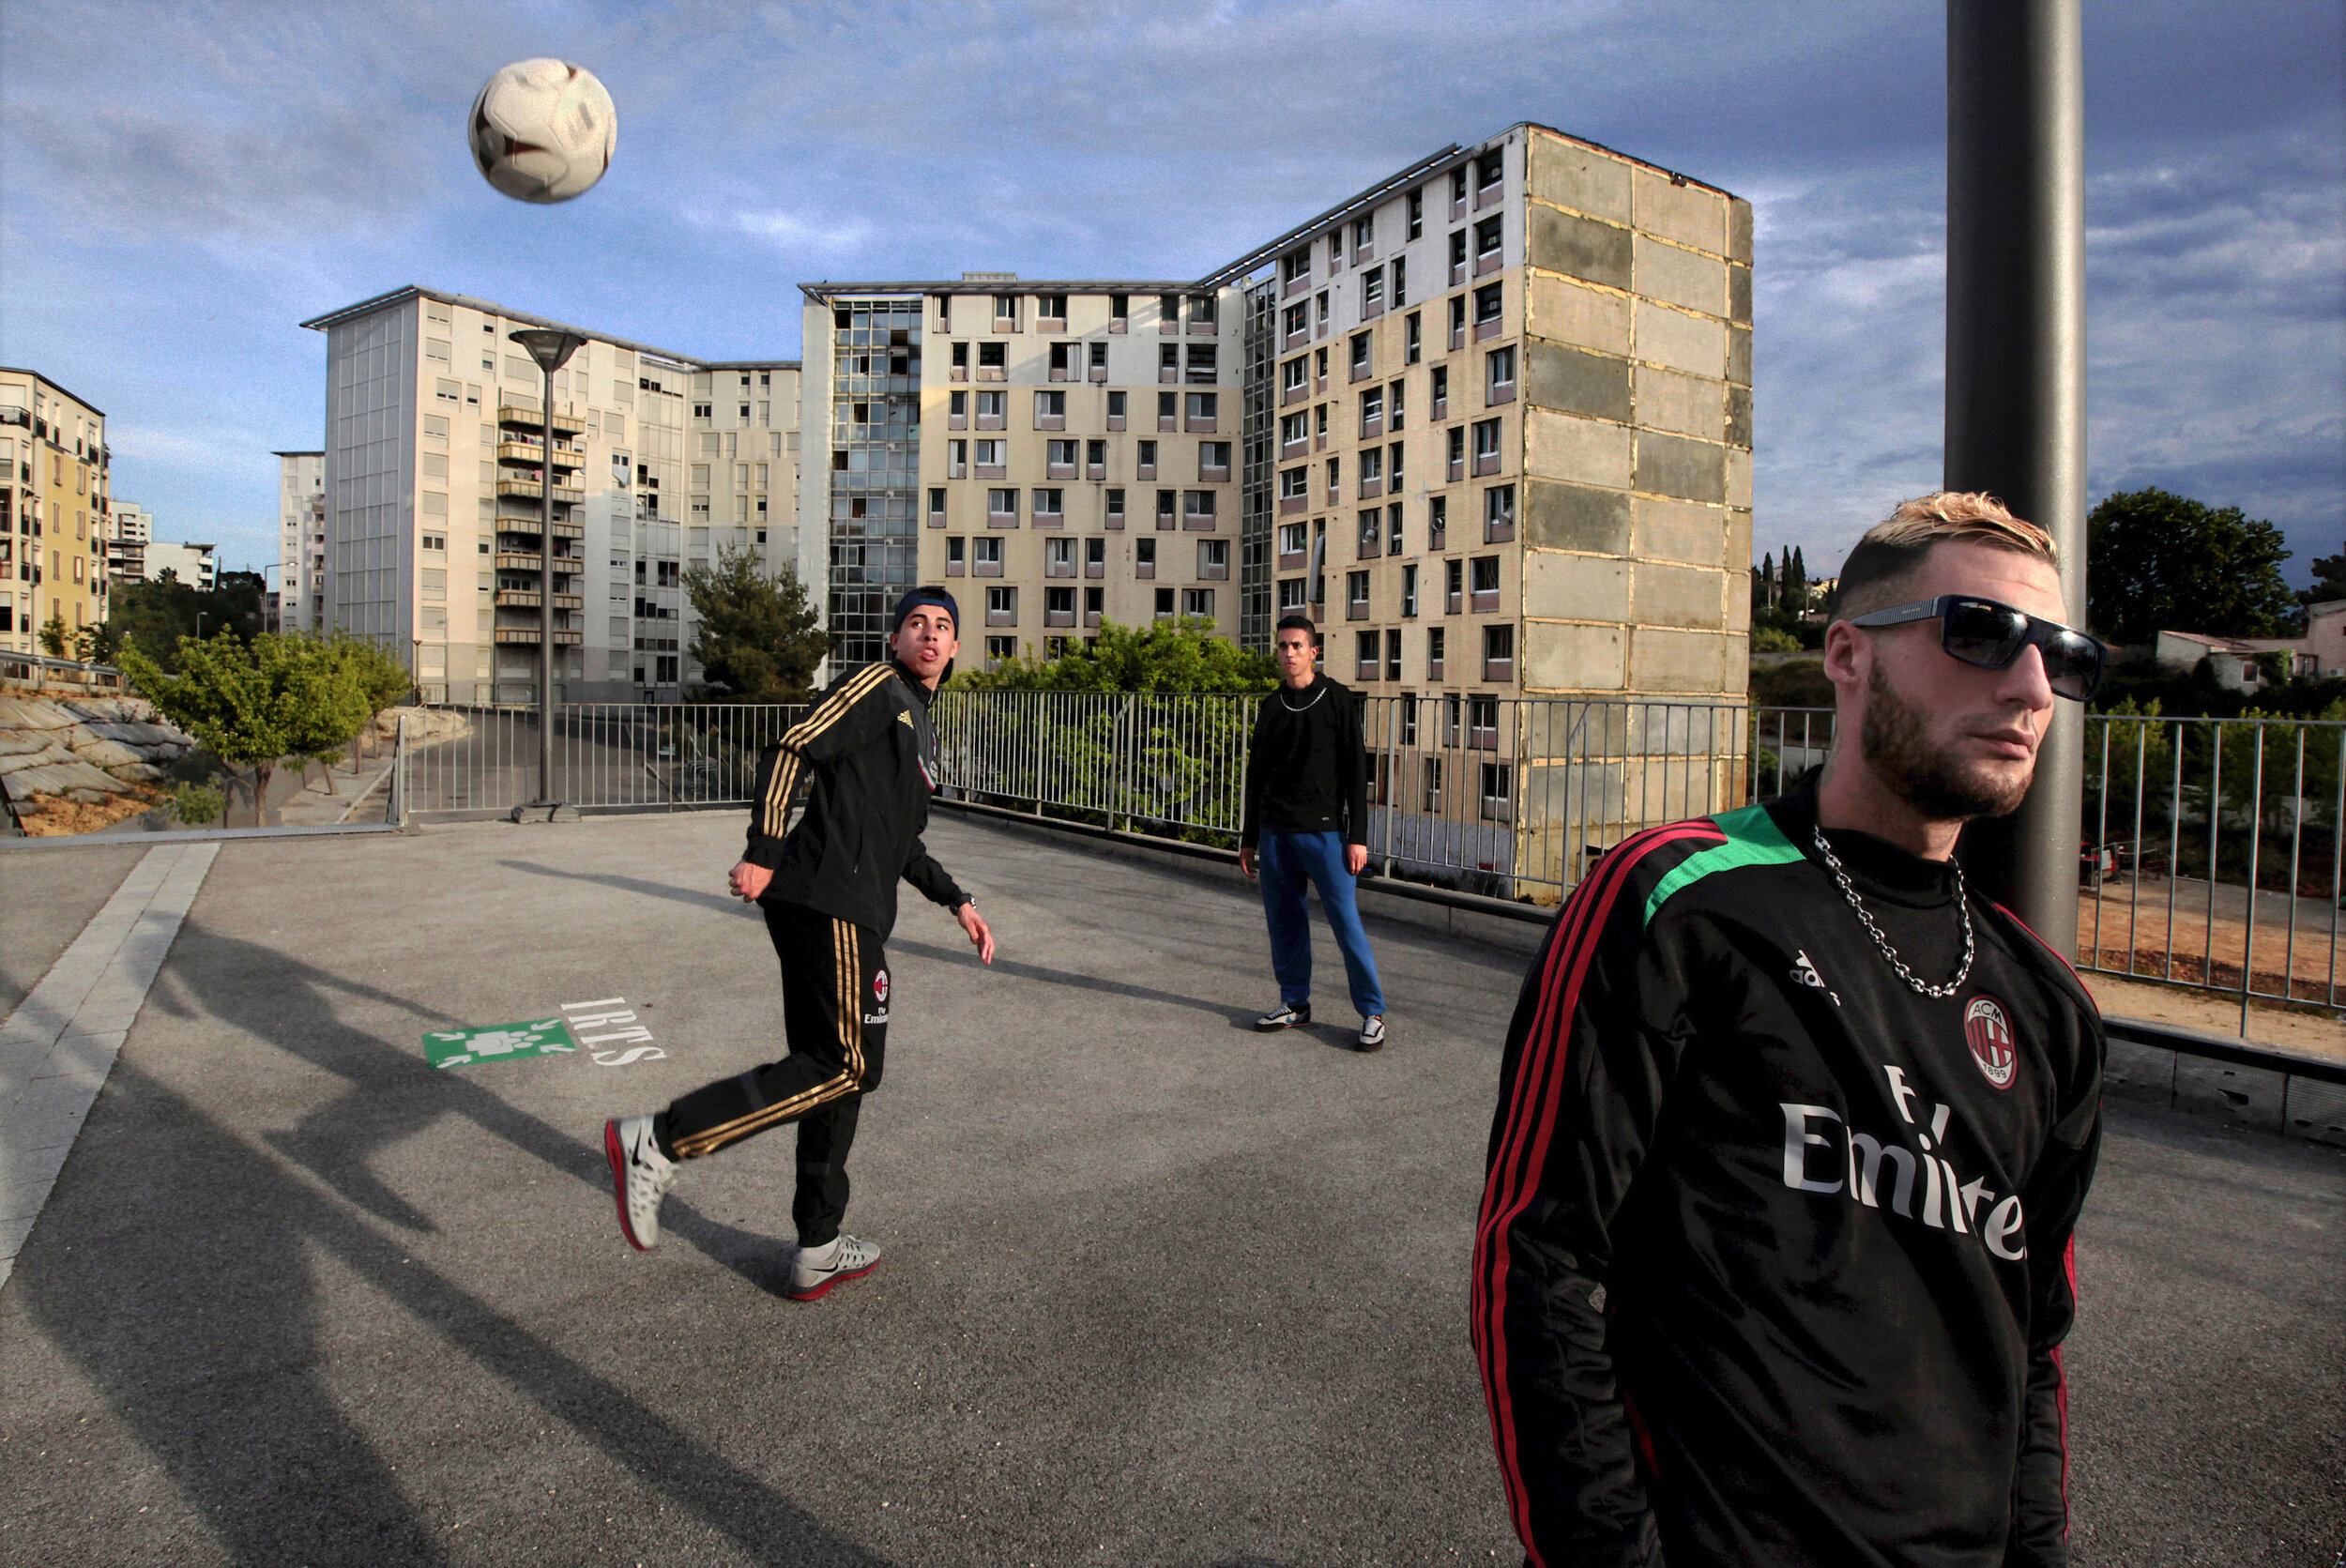   France. Marseille. 2014. Young men honing their soccer skills outside a social service office at cité les Flamants in the 14th arrondissement. This neighborhood has been identified as one of the fourteen sites for the Marseille Urban Renovation pro